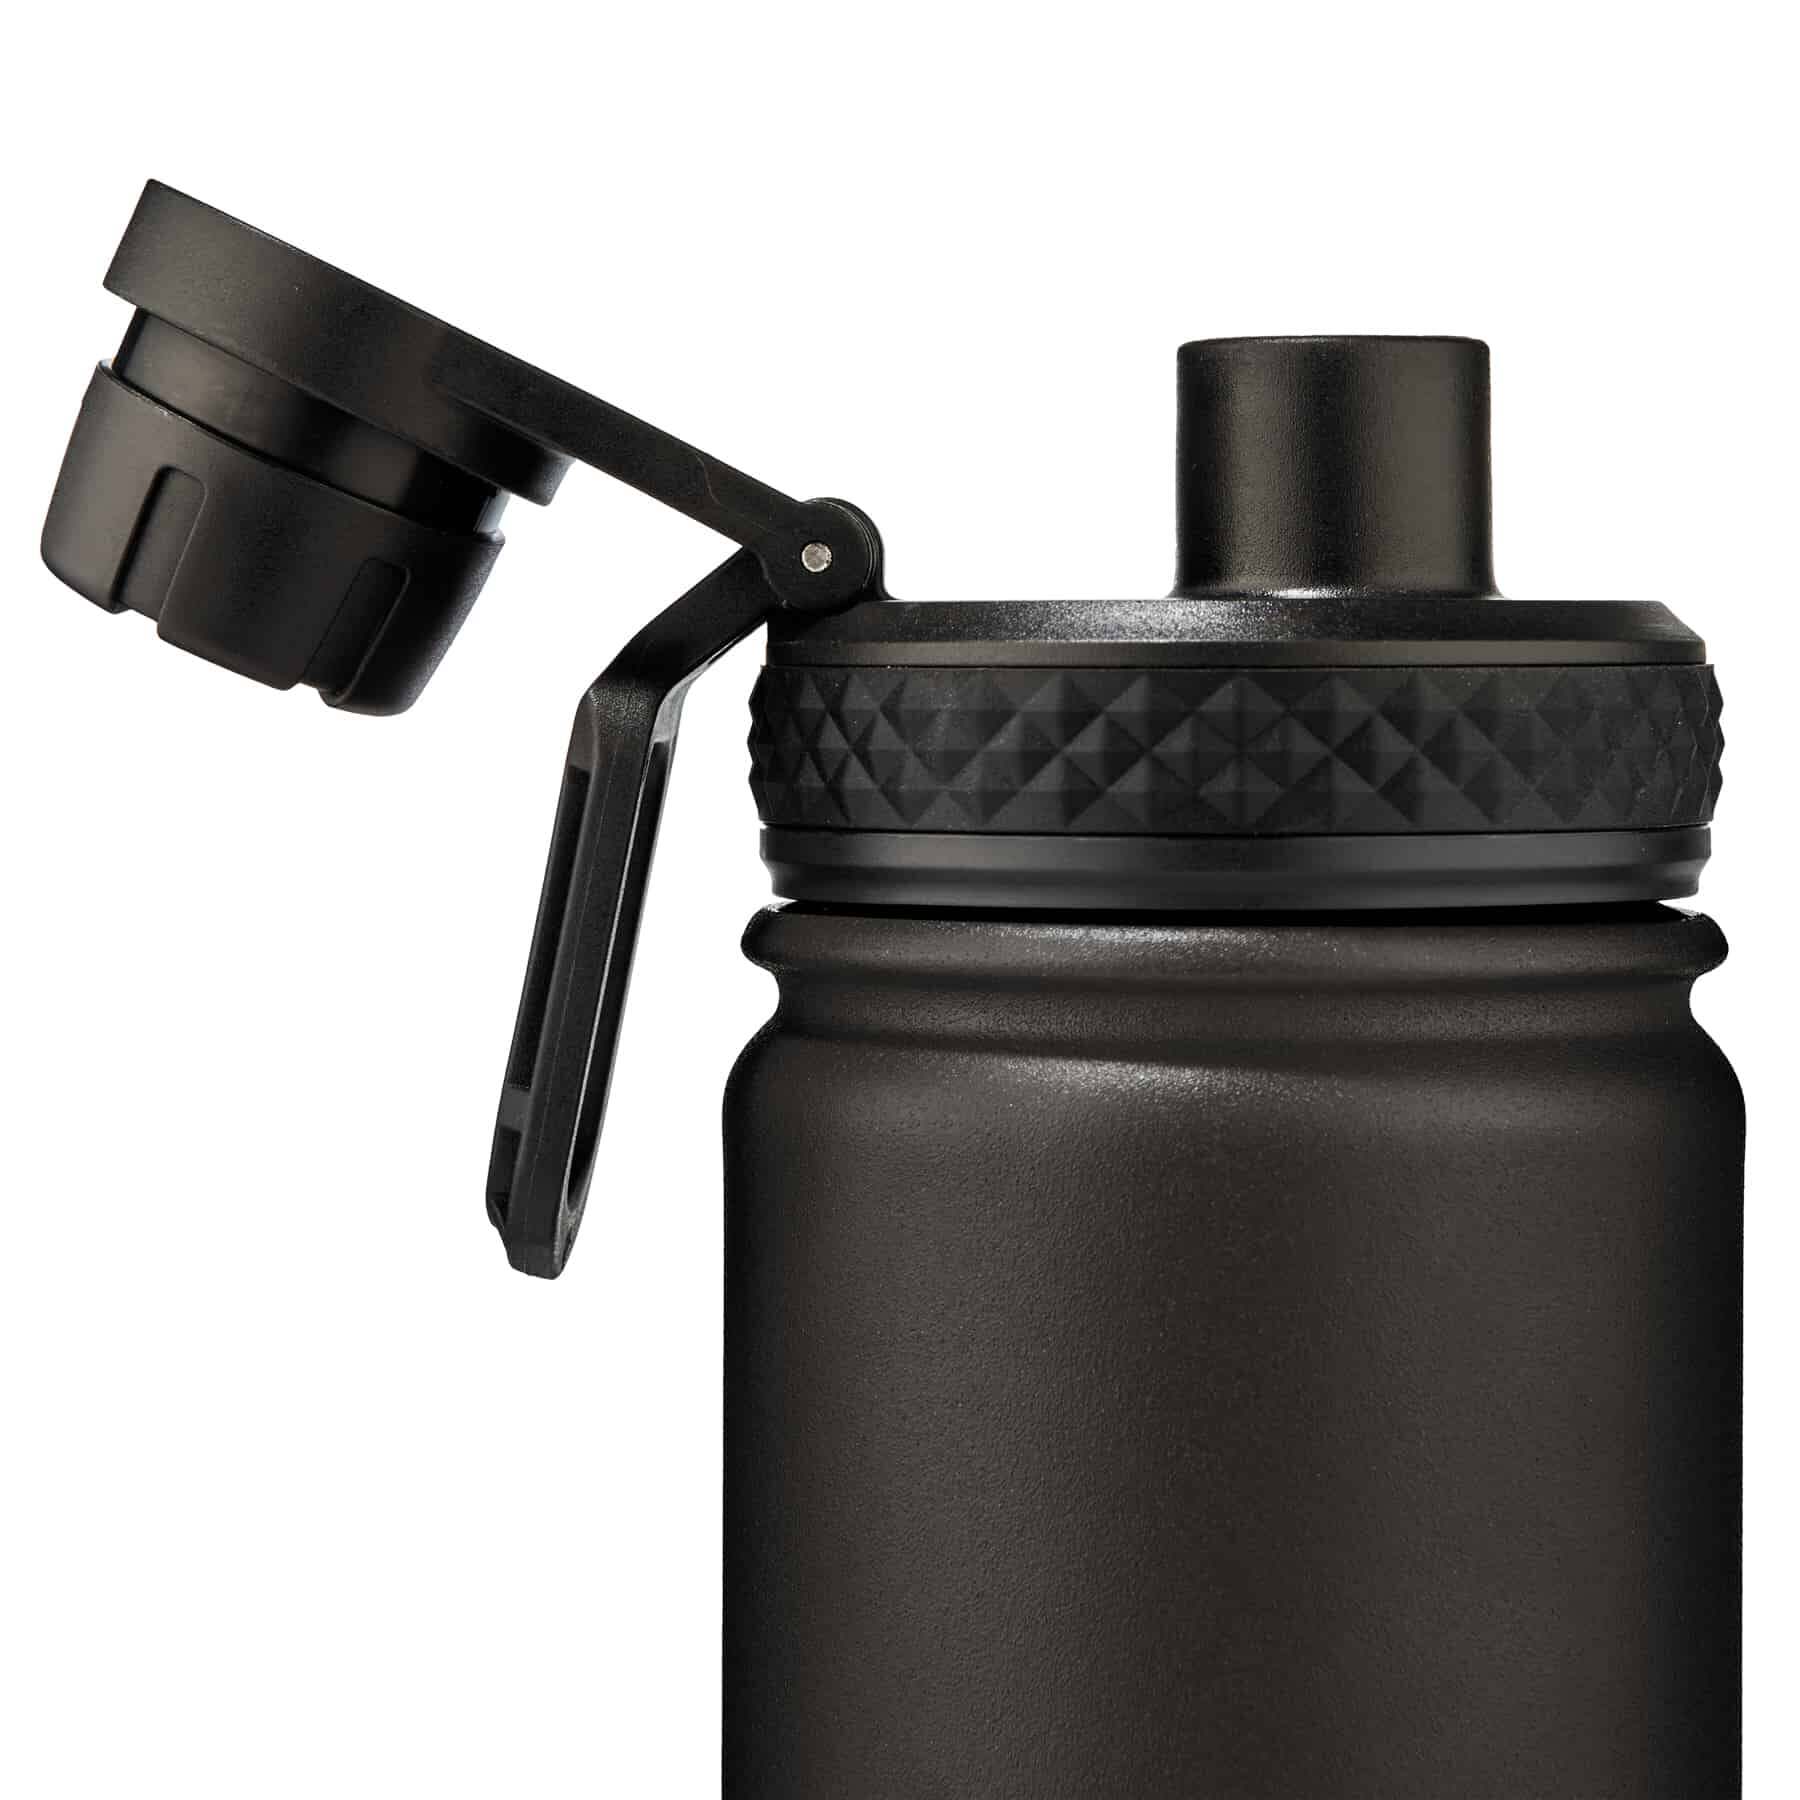 HOT-Chill Sports Water Bottle 16 oz Leak-Proof No Sweating BPA Free  Reusable Vacuum Insulated Stainless Steel Water Bottles Double walled  Coffee